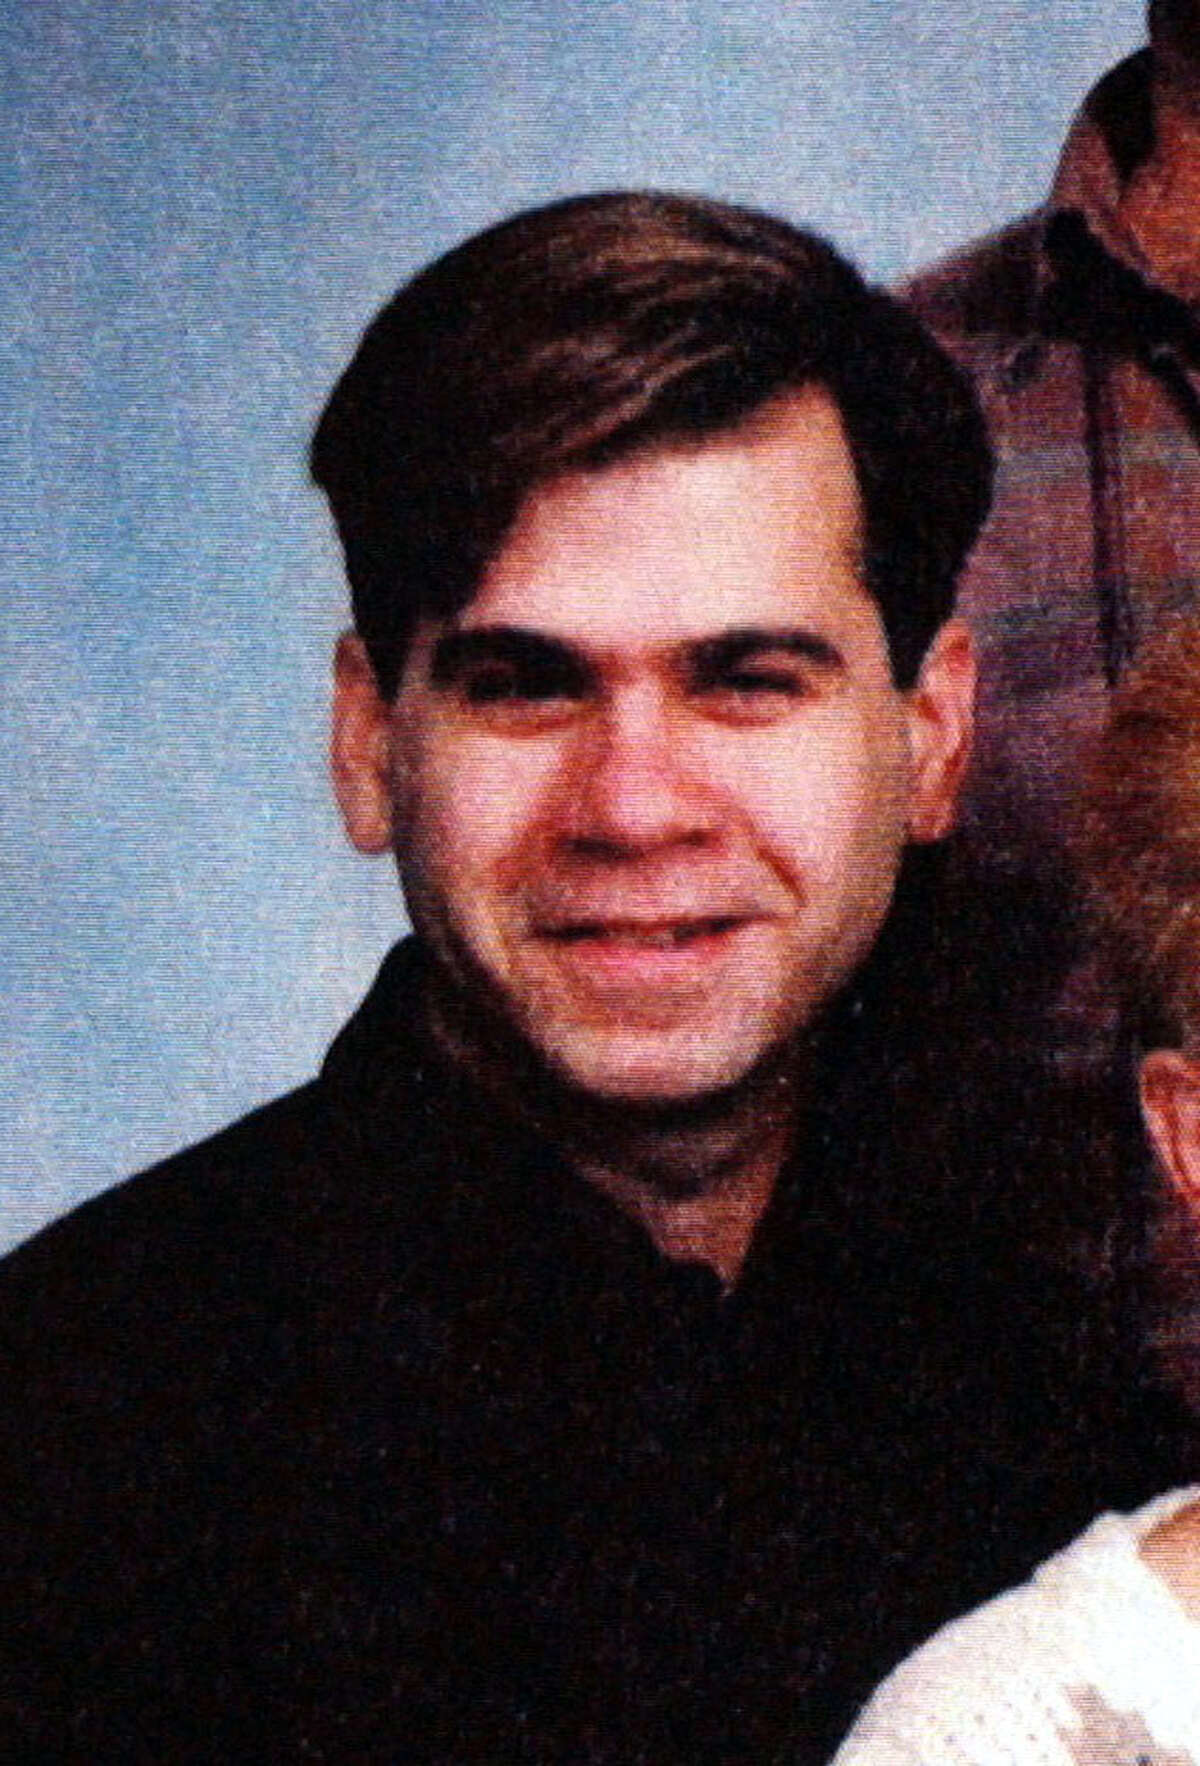 Paul Broussard was killed in a 1991 gay bashing attack after leaving a Montrose-area club.